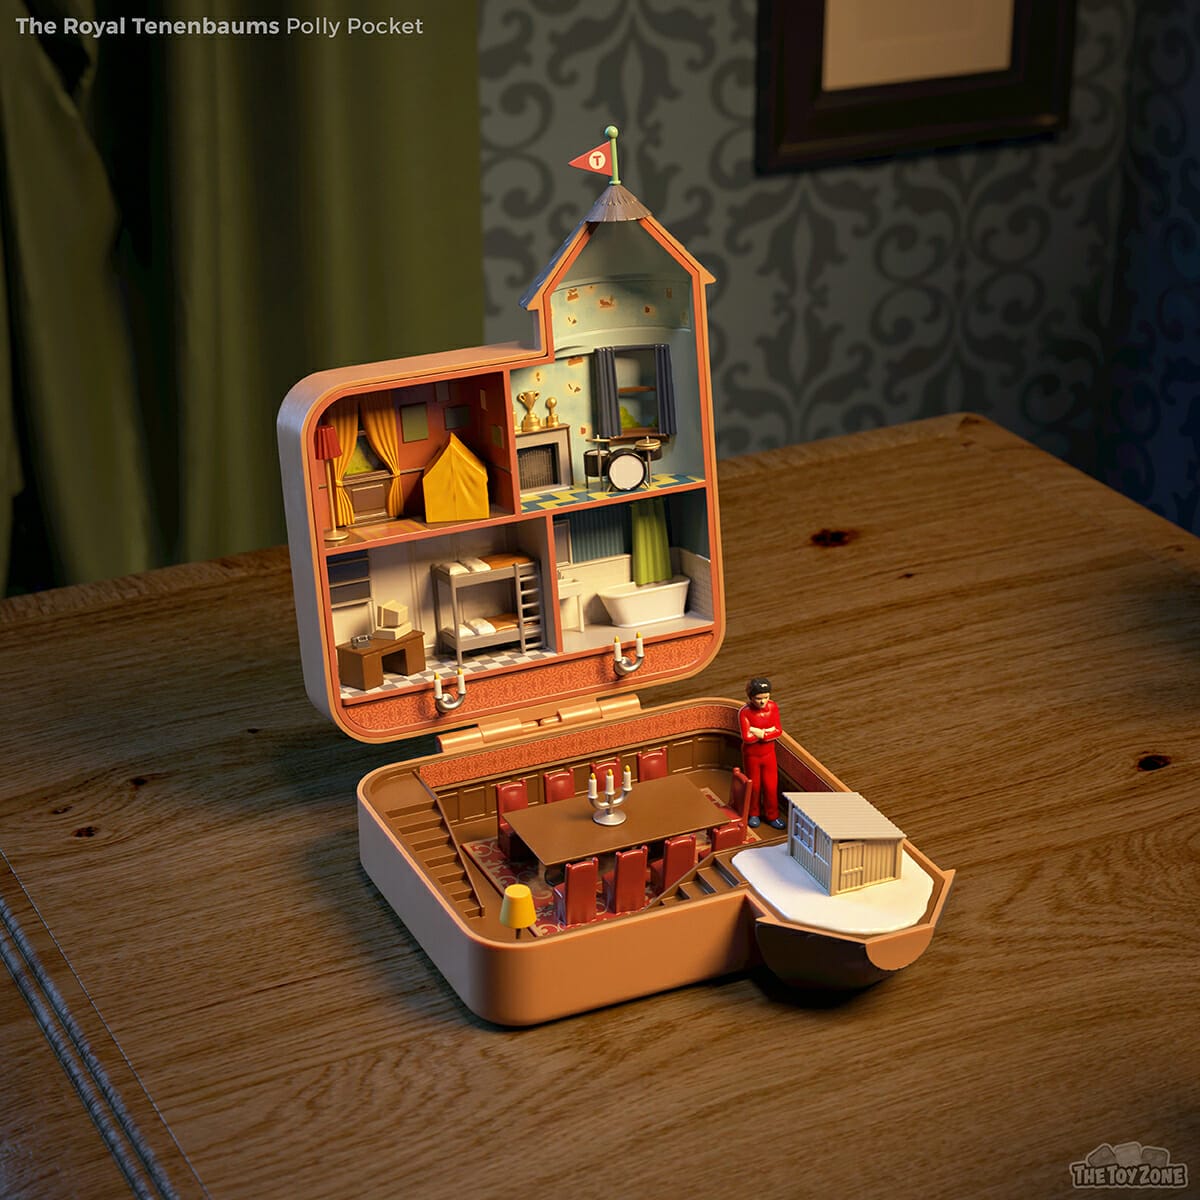 The Royal Tenebaums Polly Pocket